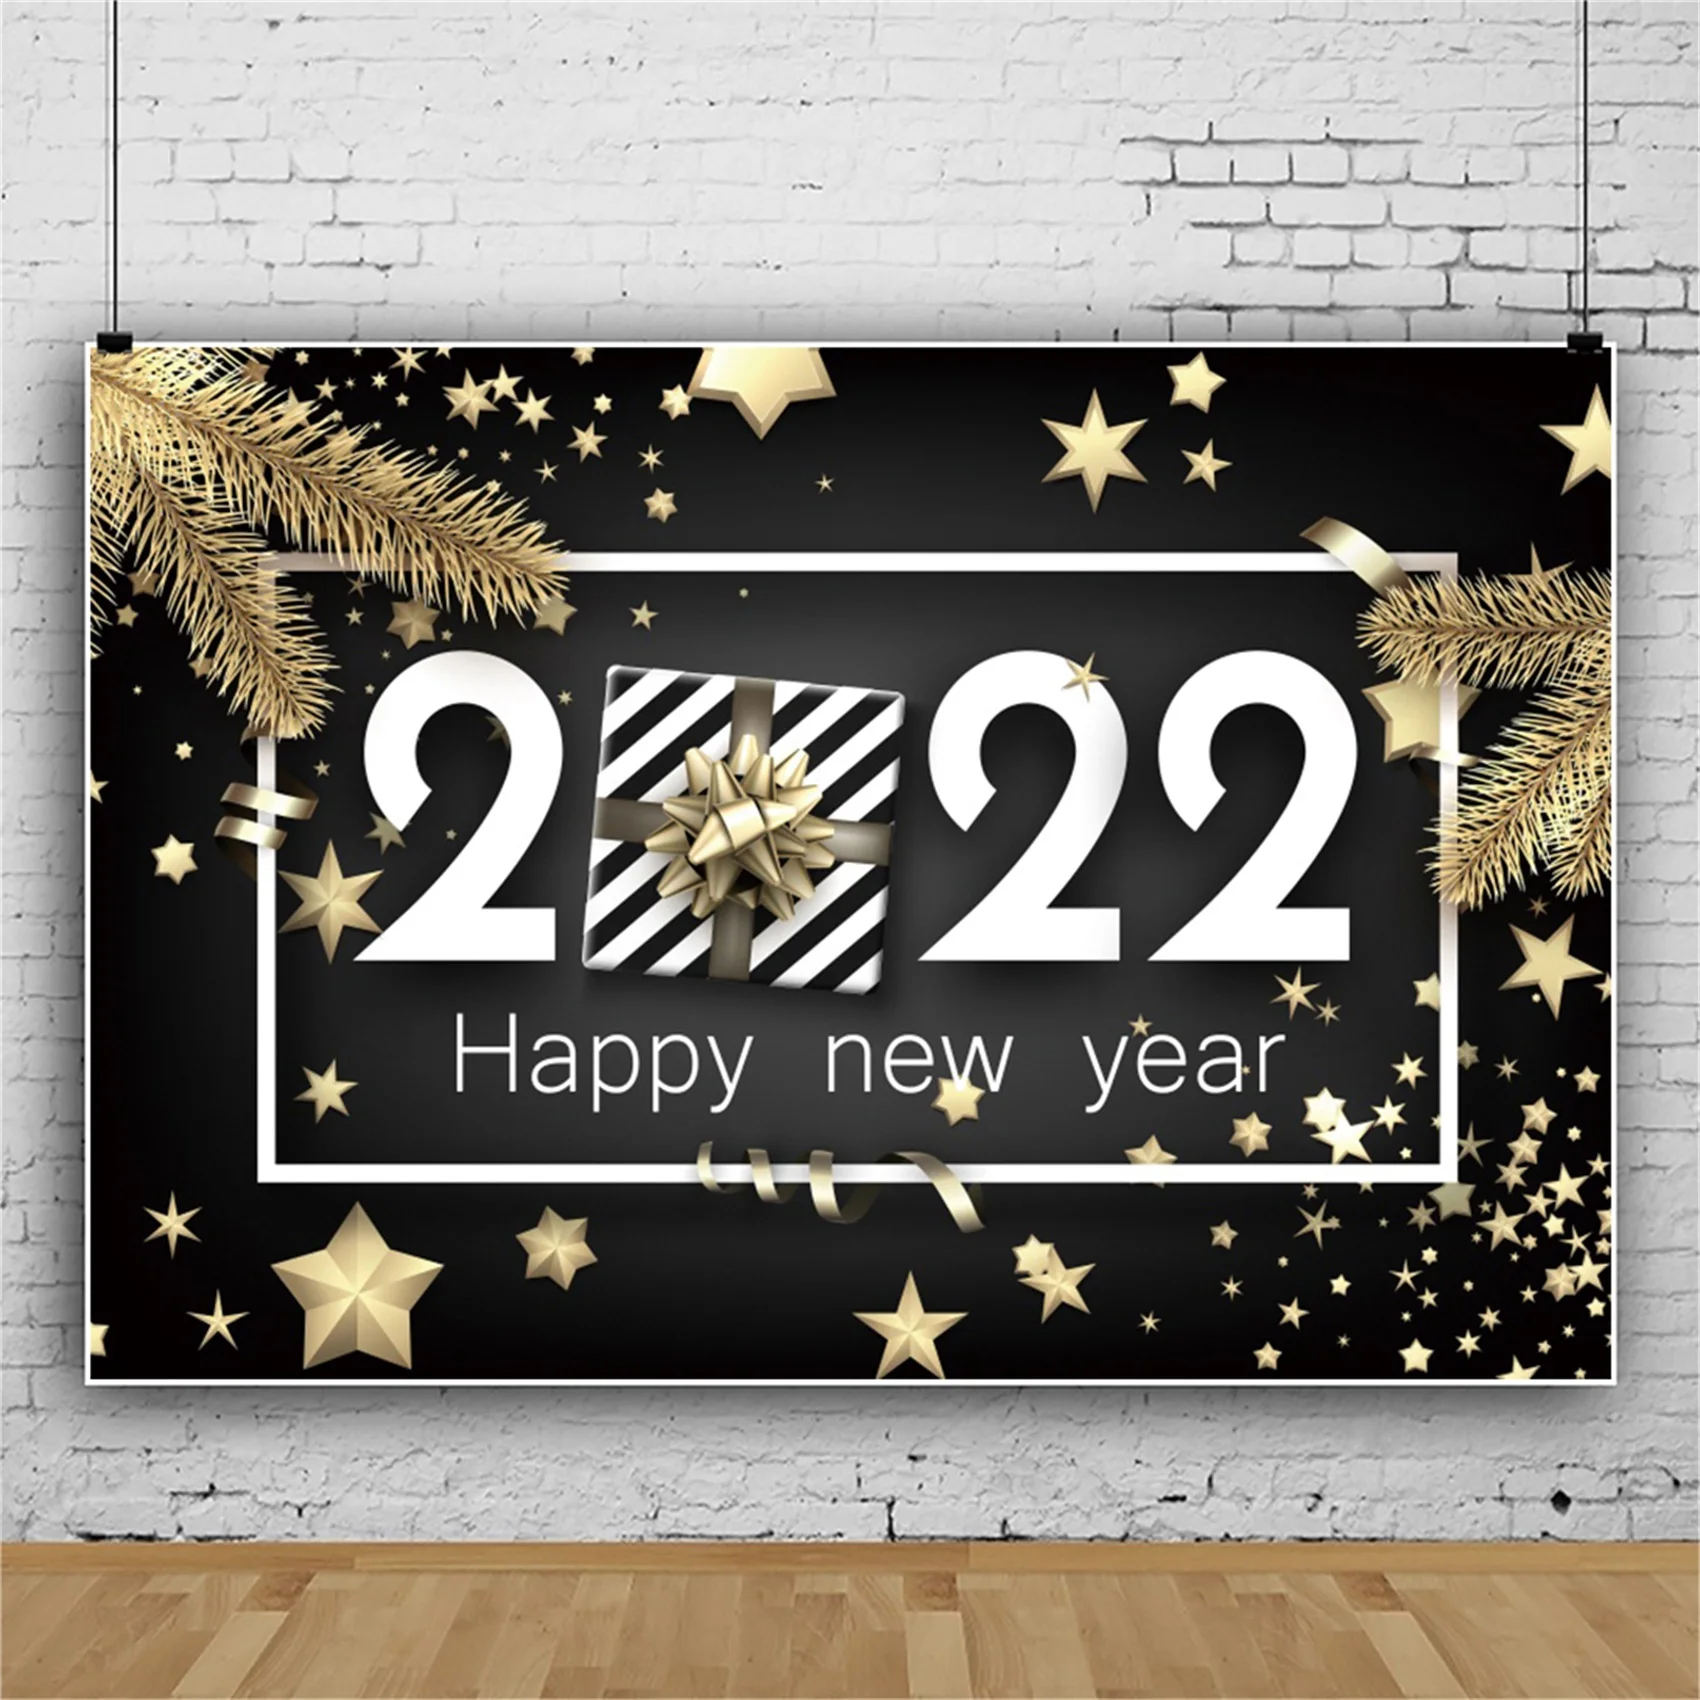 

Laeacco Winter New Year Of 2022 Merry Christmas Star Pine Poster Banner Photographic Backdrop Photo Background Photo Studio